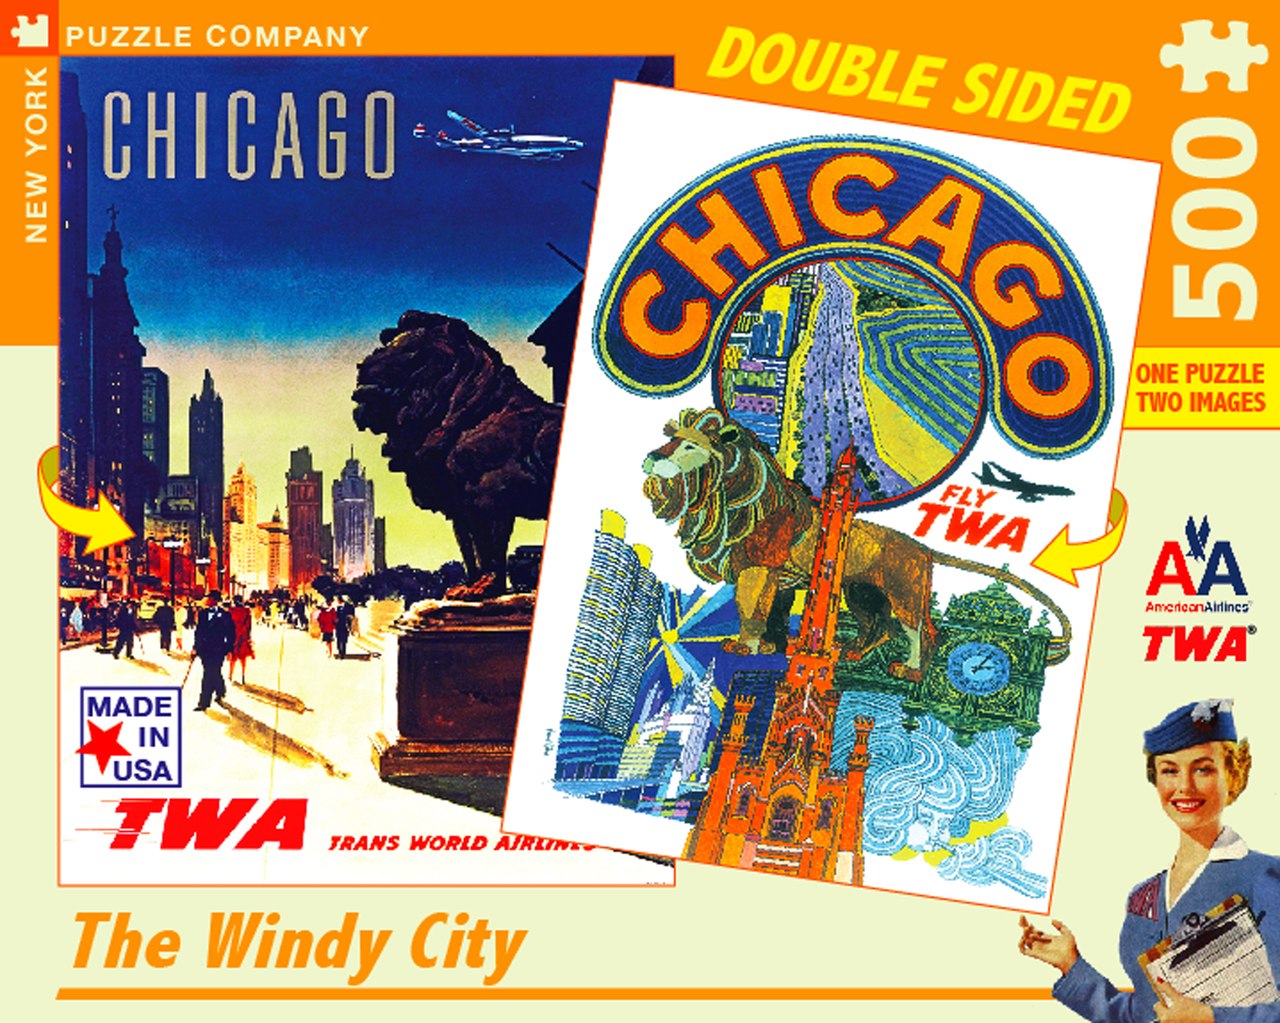 Chicago DS - 500pc Jigsaw Puzzle by New York Puzzle Company